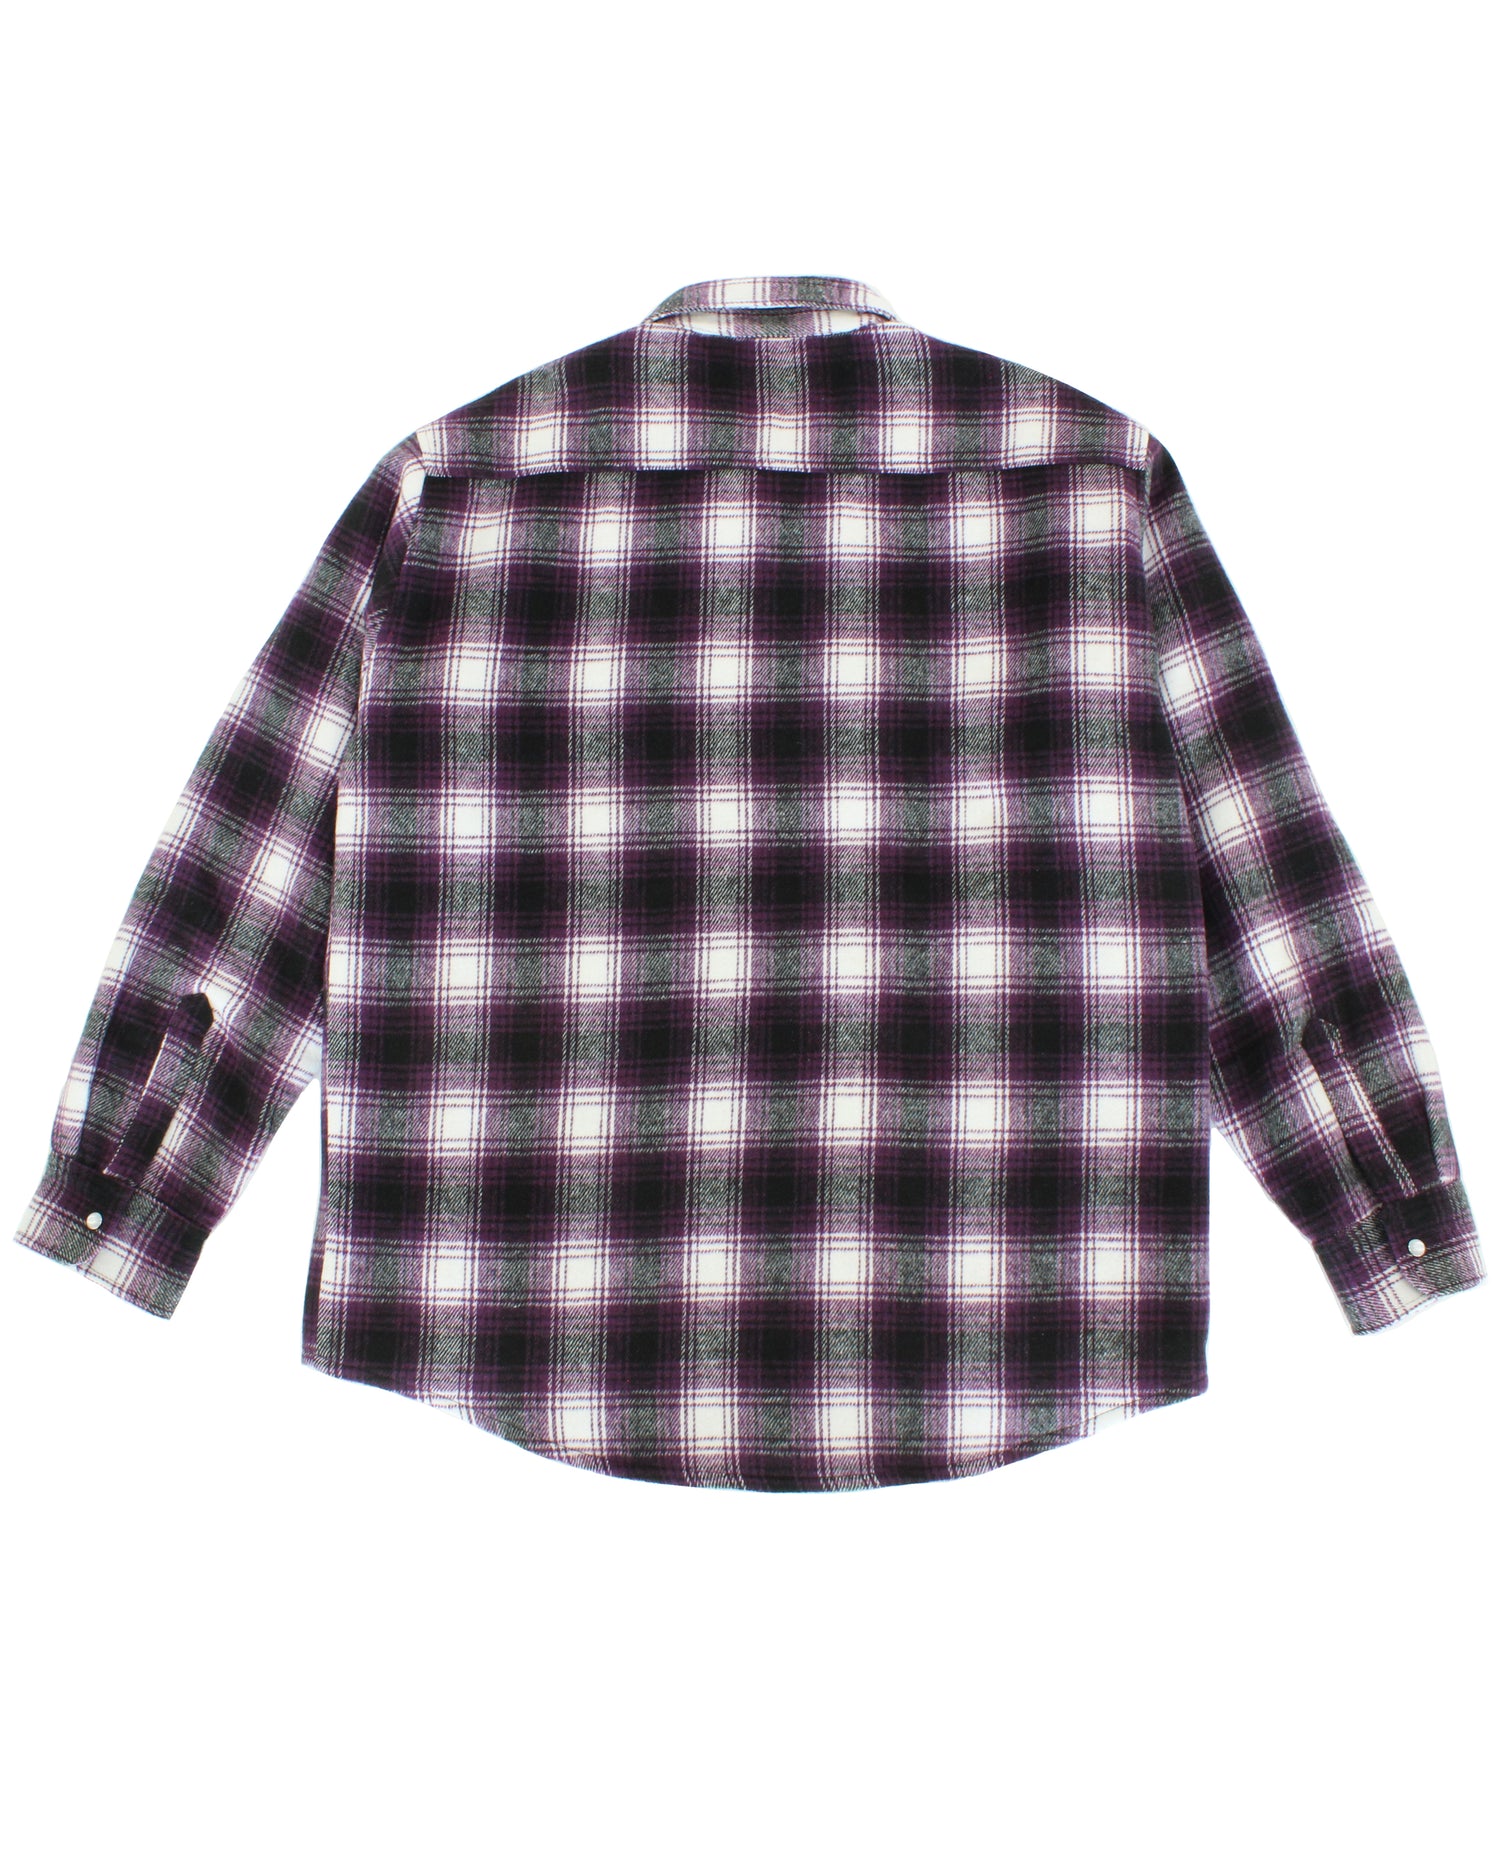 TAHOE QUILTED FLANNEL - PURPLE